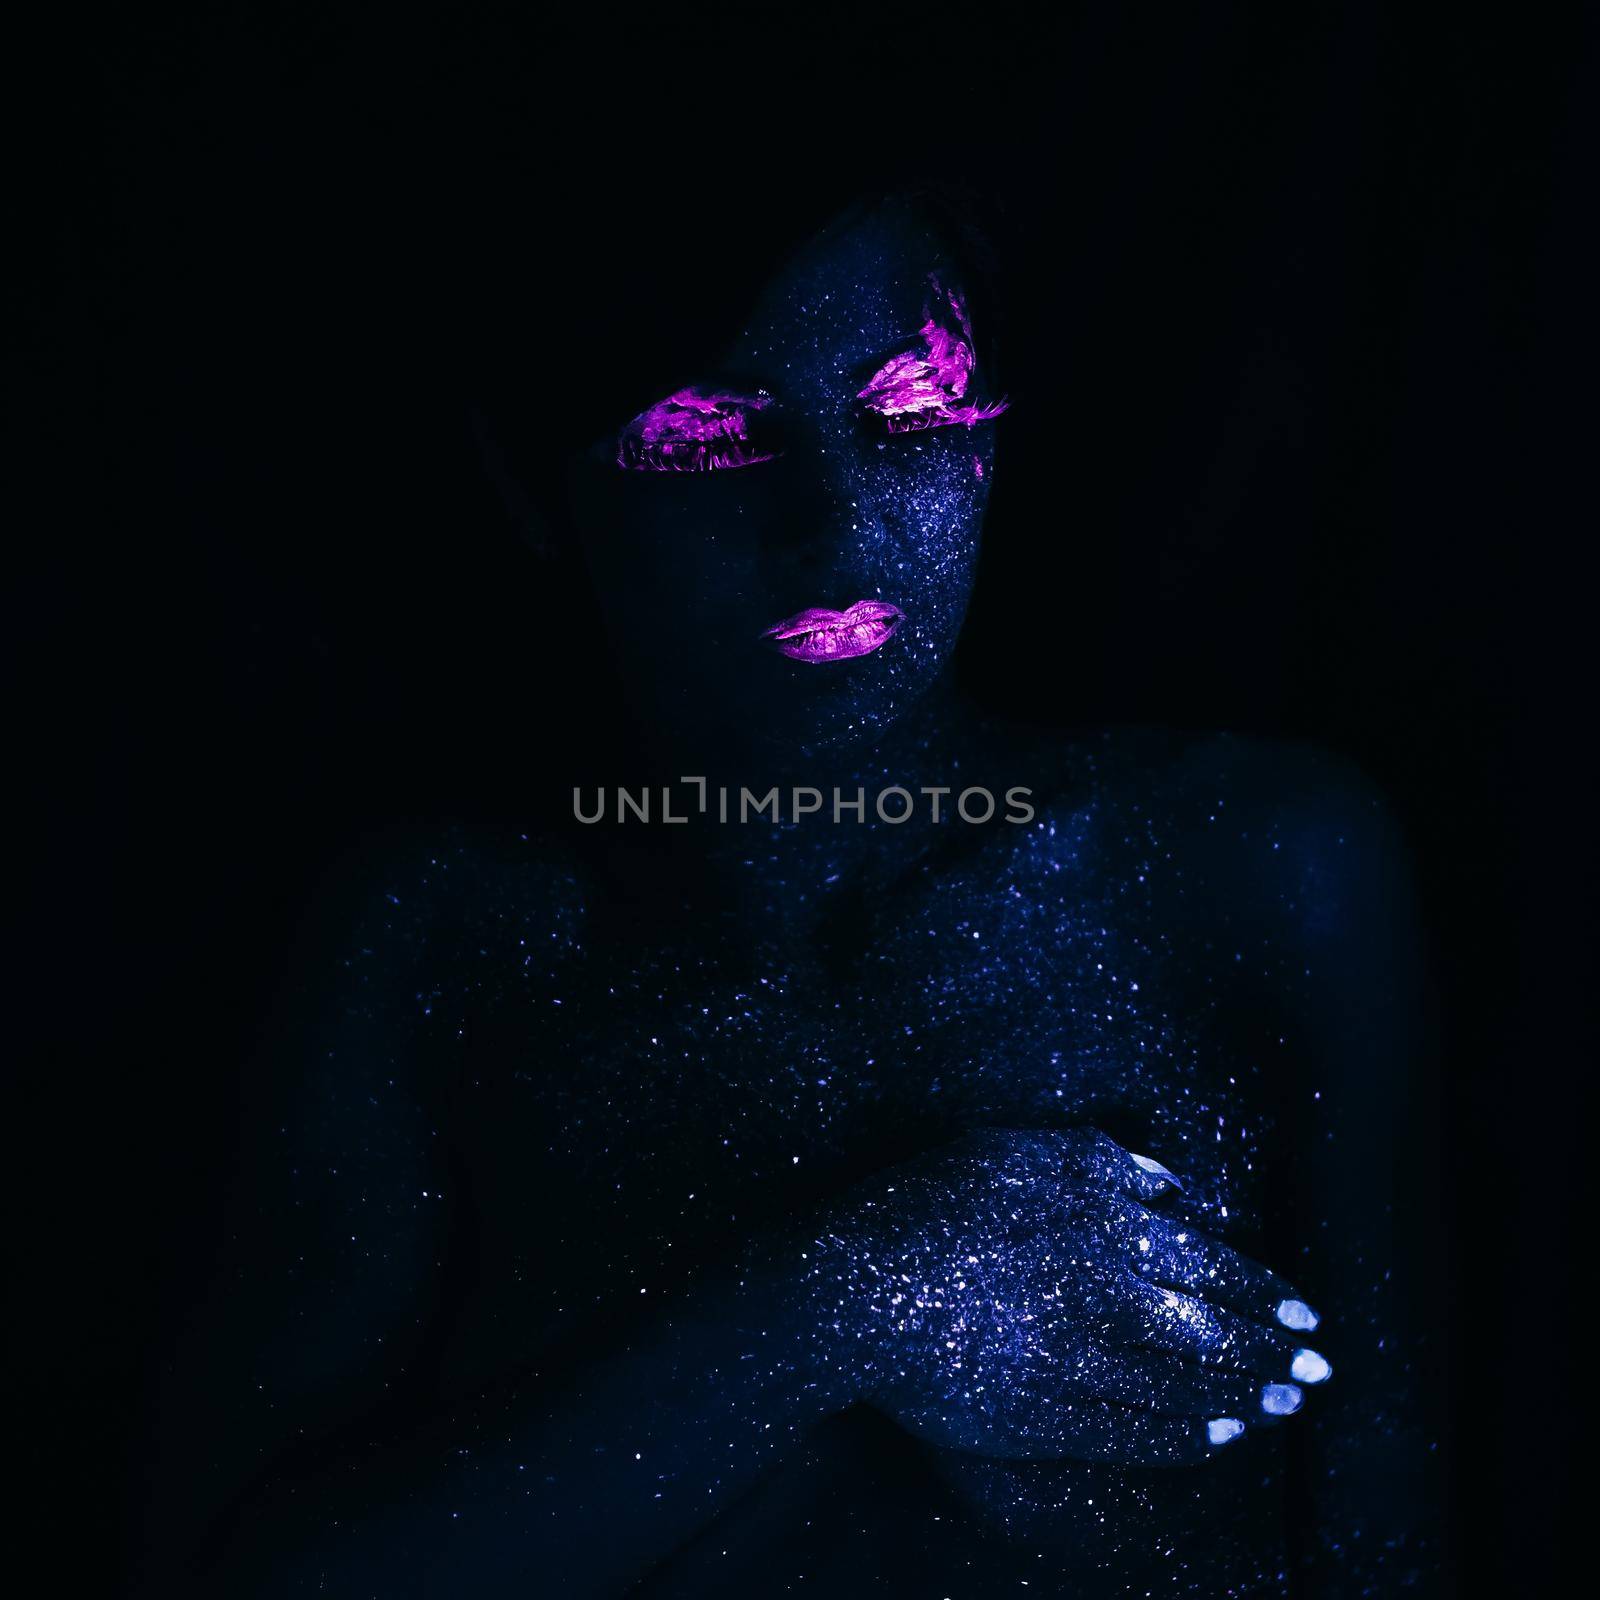 Portrait of Beautiful Fashion Woman in Neon UF Light. Model Girl with Fluorescent Creative Psychedelic MakeUp, Art Design of Female Model in UV by OnPhotoUa